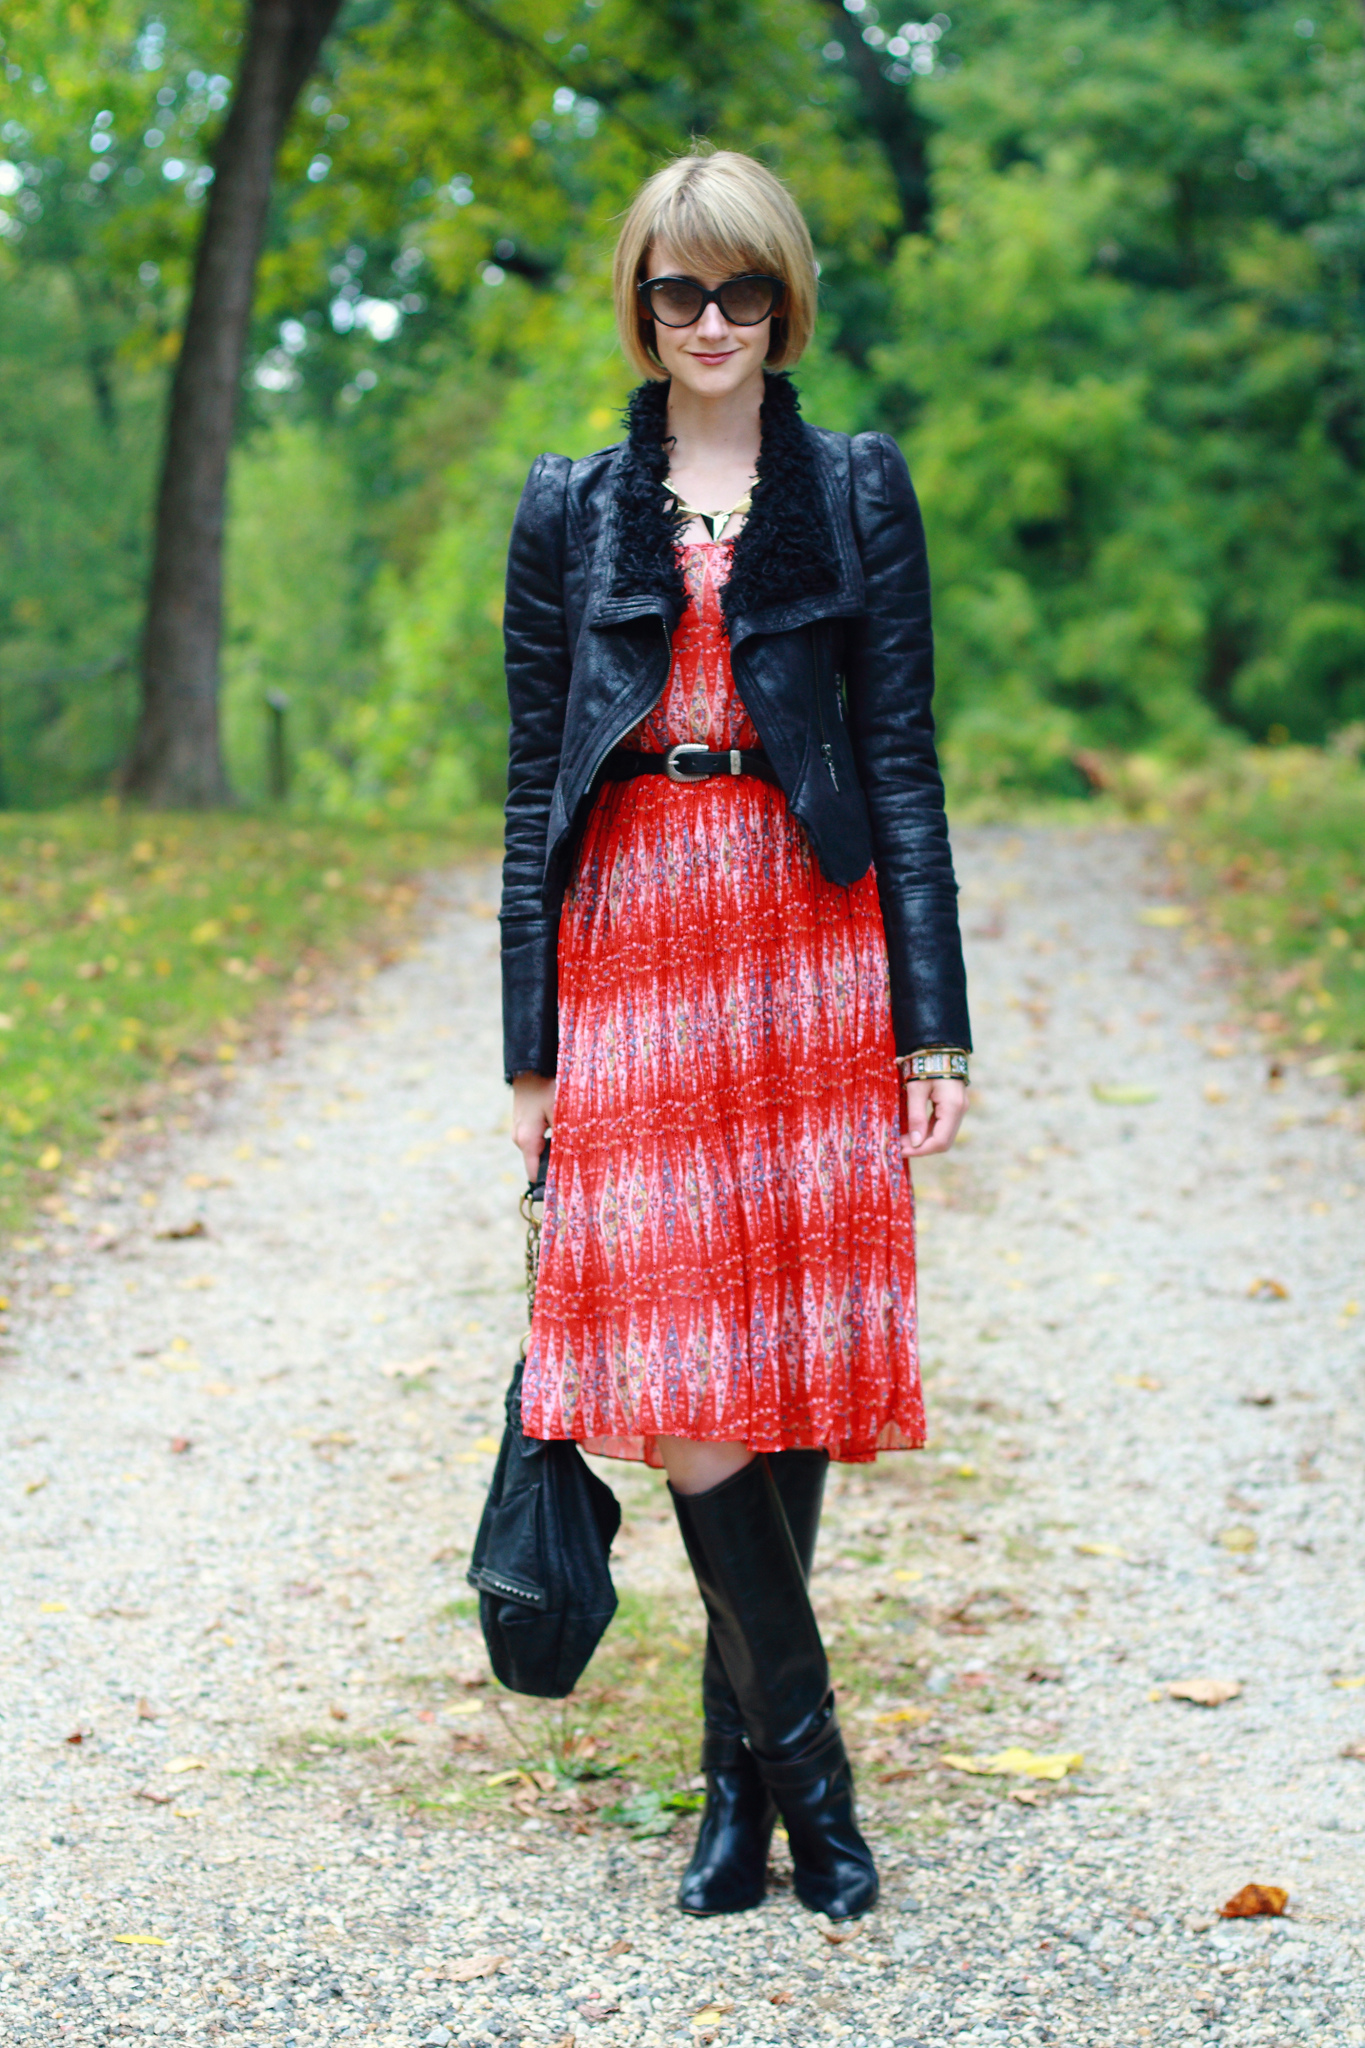 Romwe leather jacket and red dress